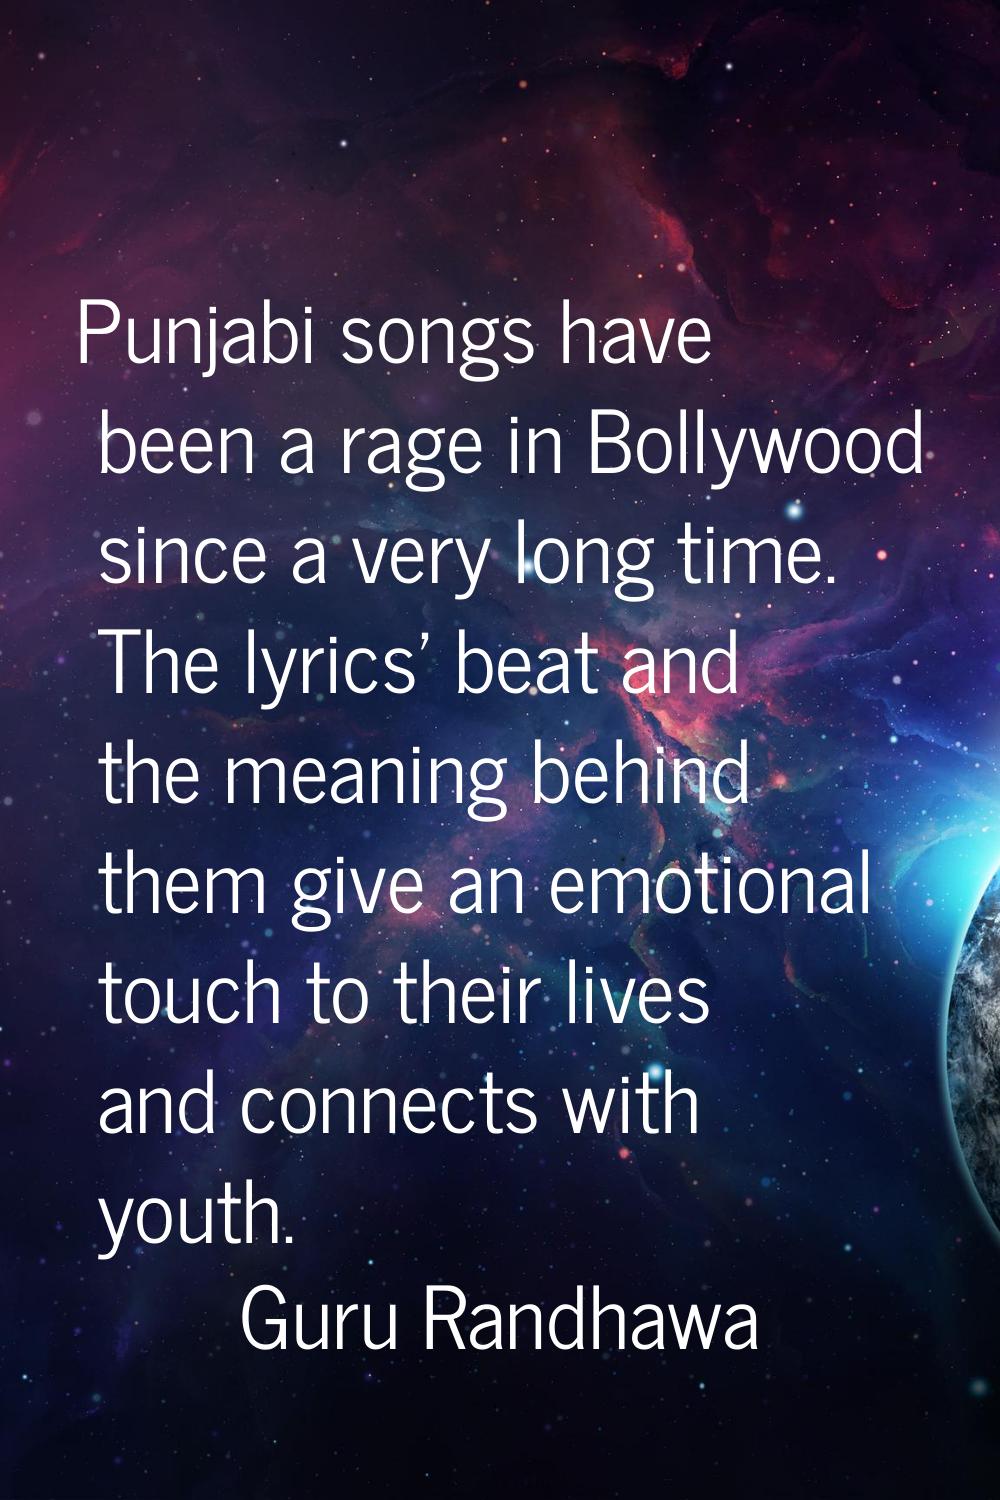 Punjabi songs have been a rage in Bollywood since a very long time. The lyrics' beat and the meanin